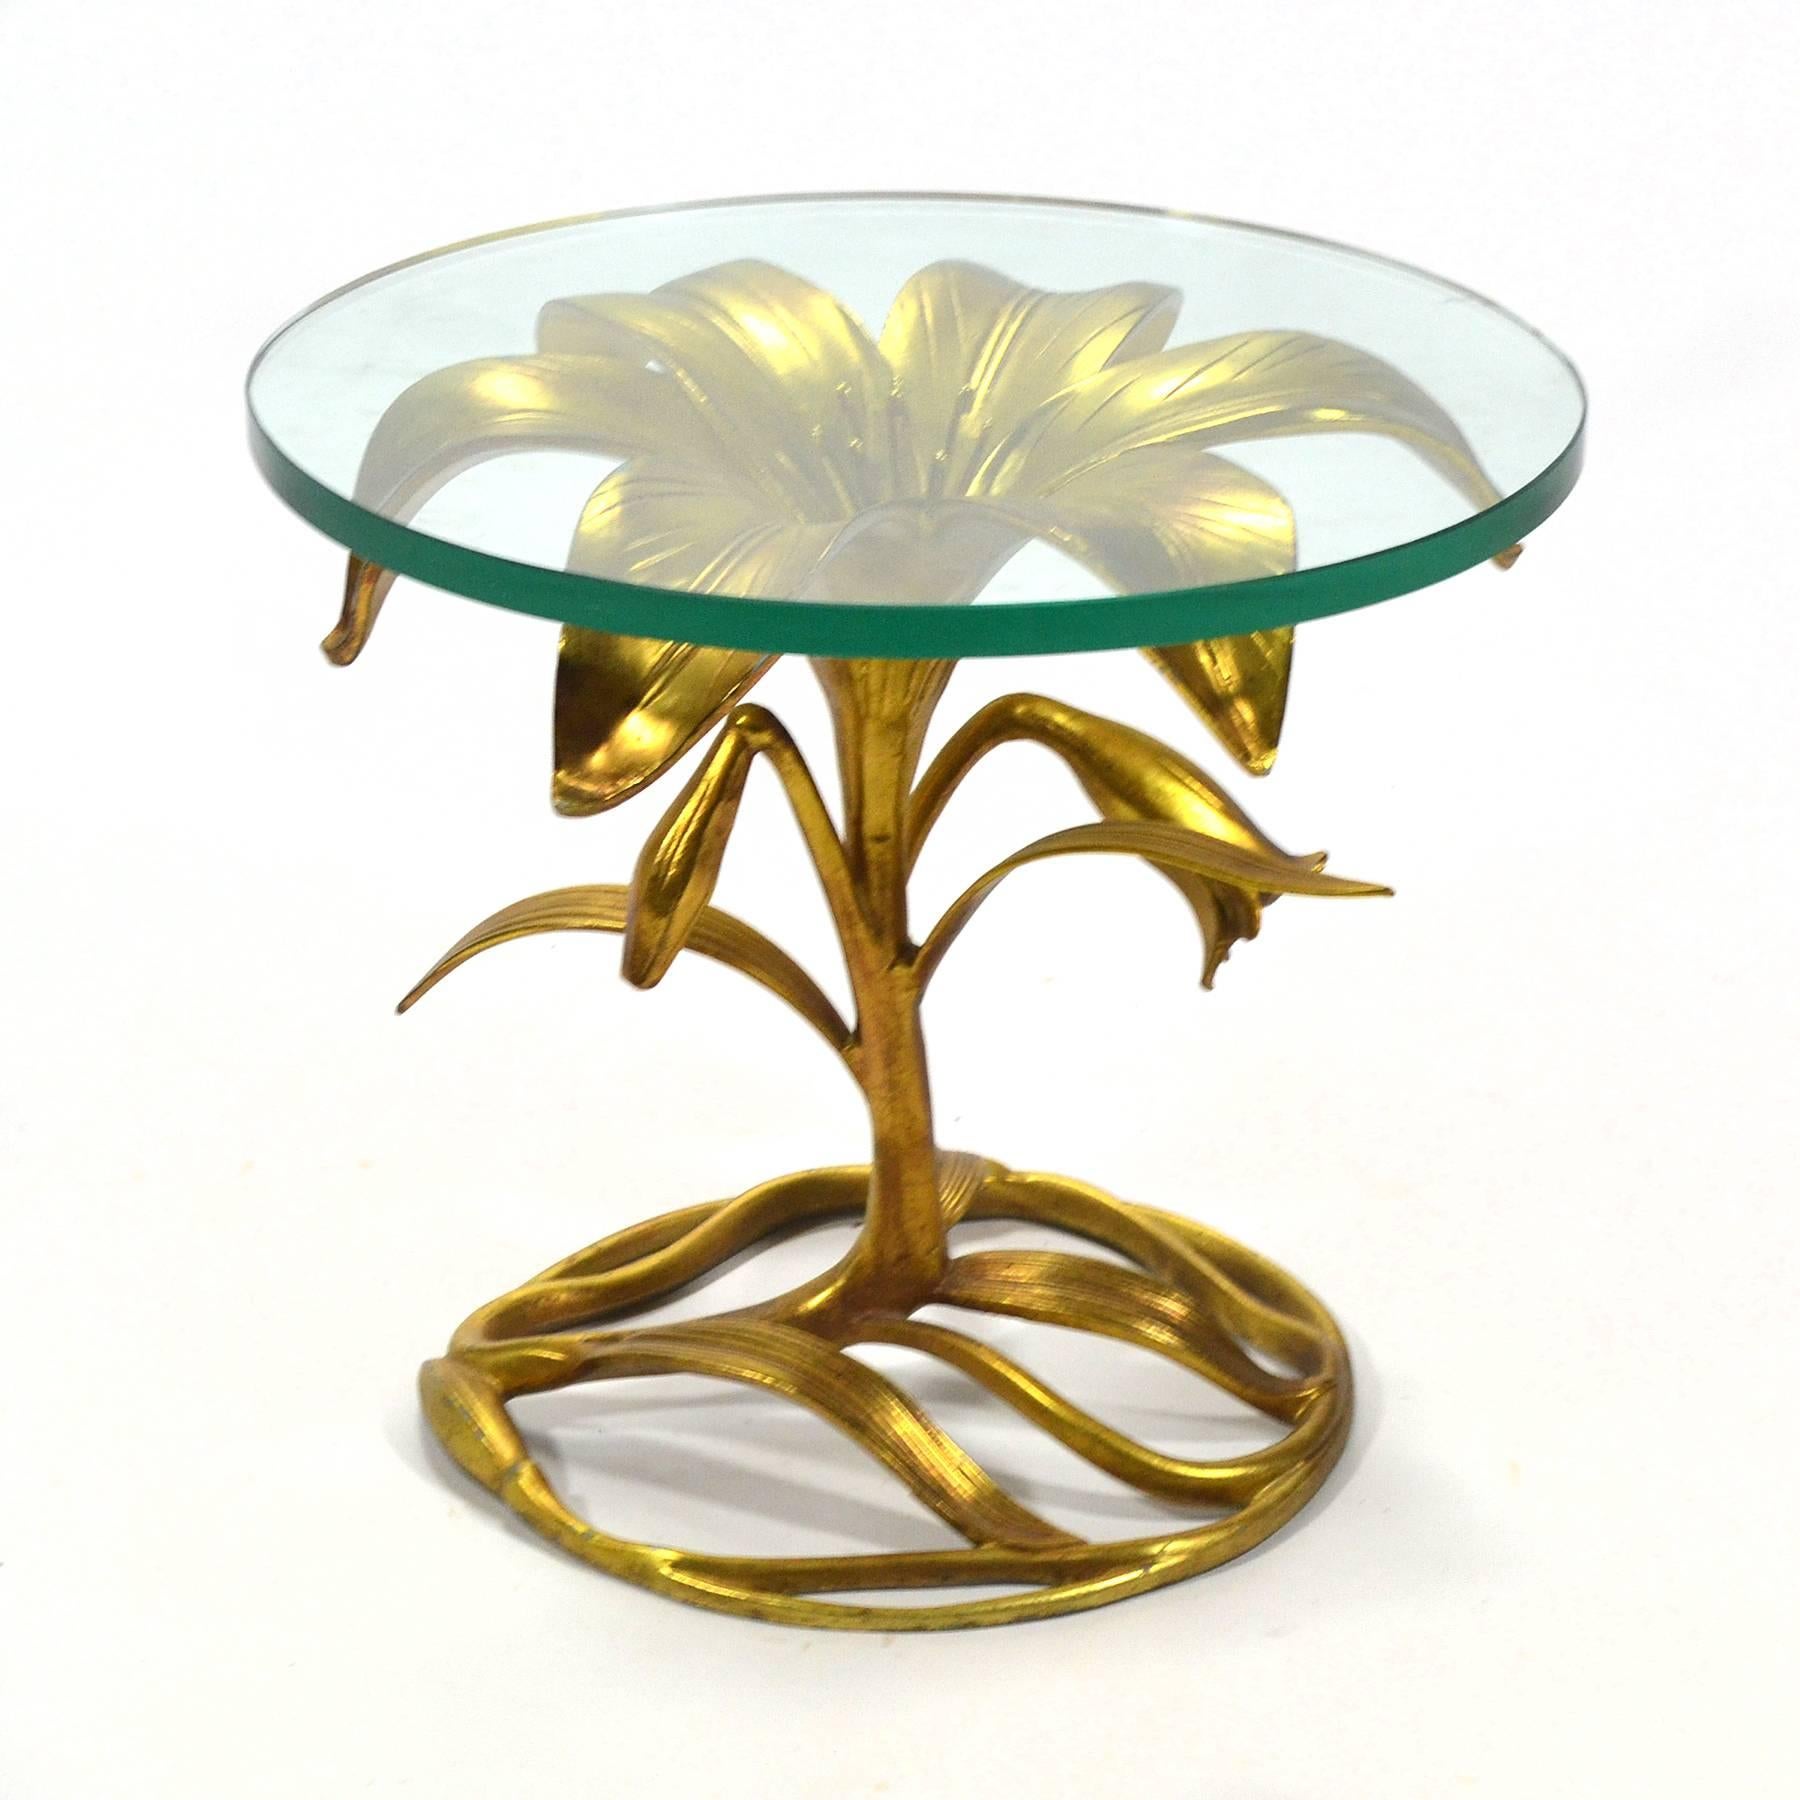 This striking gold gilded aluminum lily-form table by Arthur Court strikes just the right luxurious note. Topped with thick glass and the Art Nouveau inspired base is beautiful from every angle.